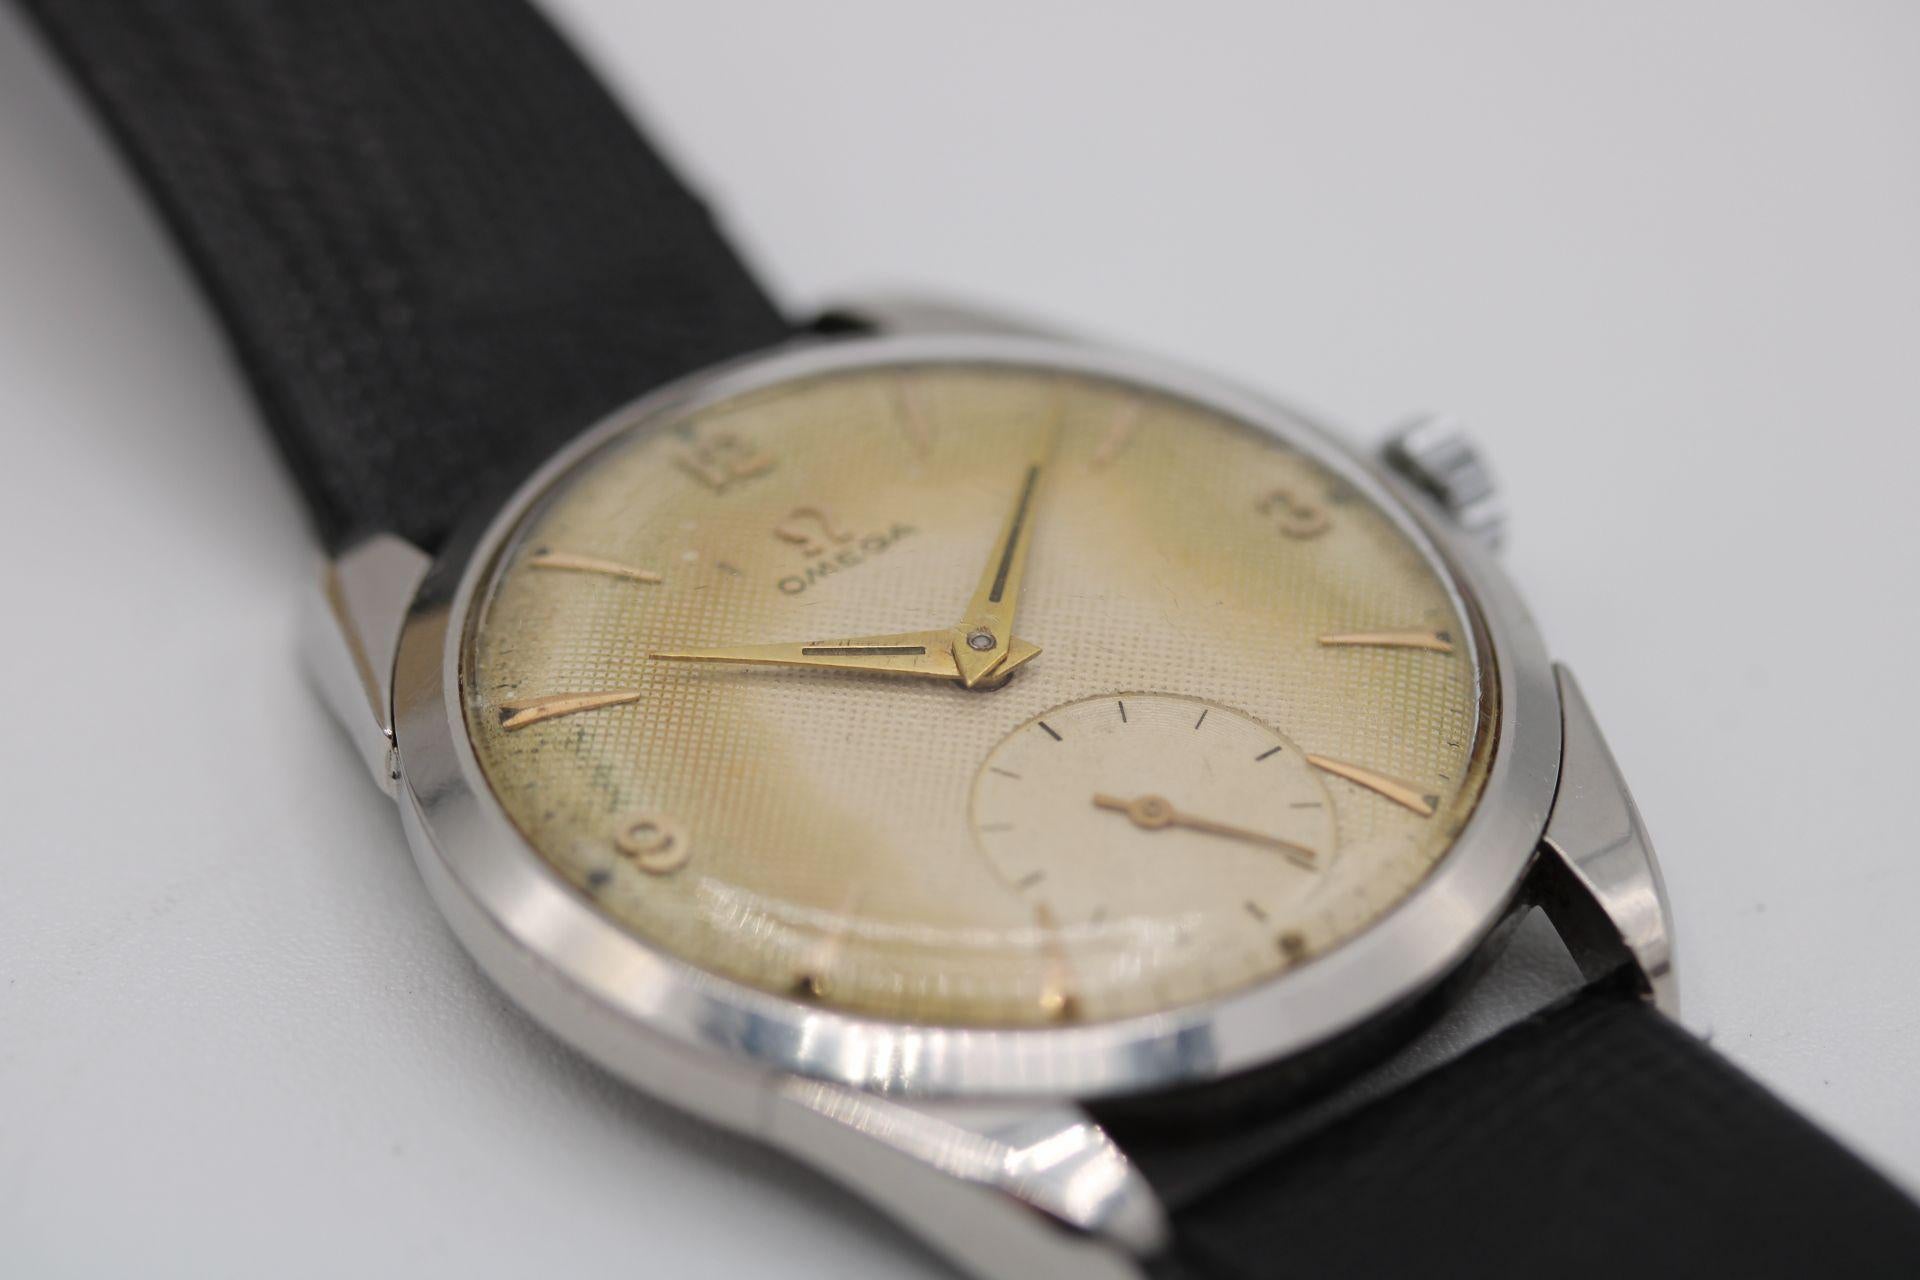 Watch: Omega Vintage 2791 c.1950s Honeycomb Dial
Stock Number: CHW5118
Price: £1,095.00

We are delighted to offer to our clients this vintage delight from the 1950s offered offered on its own in addition to our 12-month warranty. 

This vintage